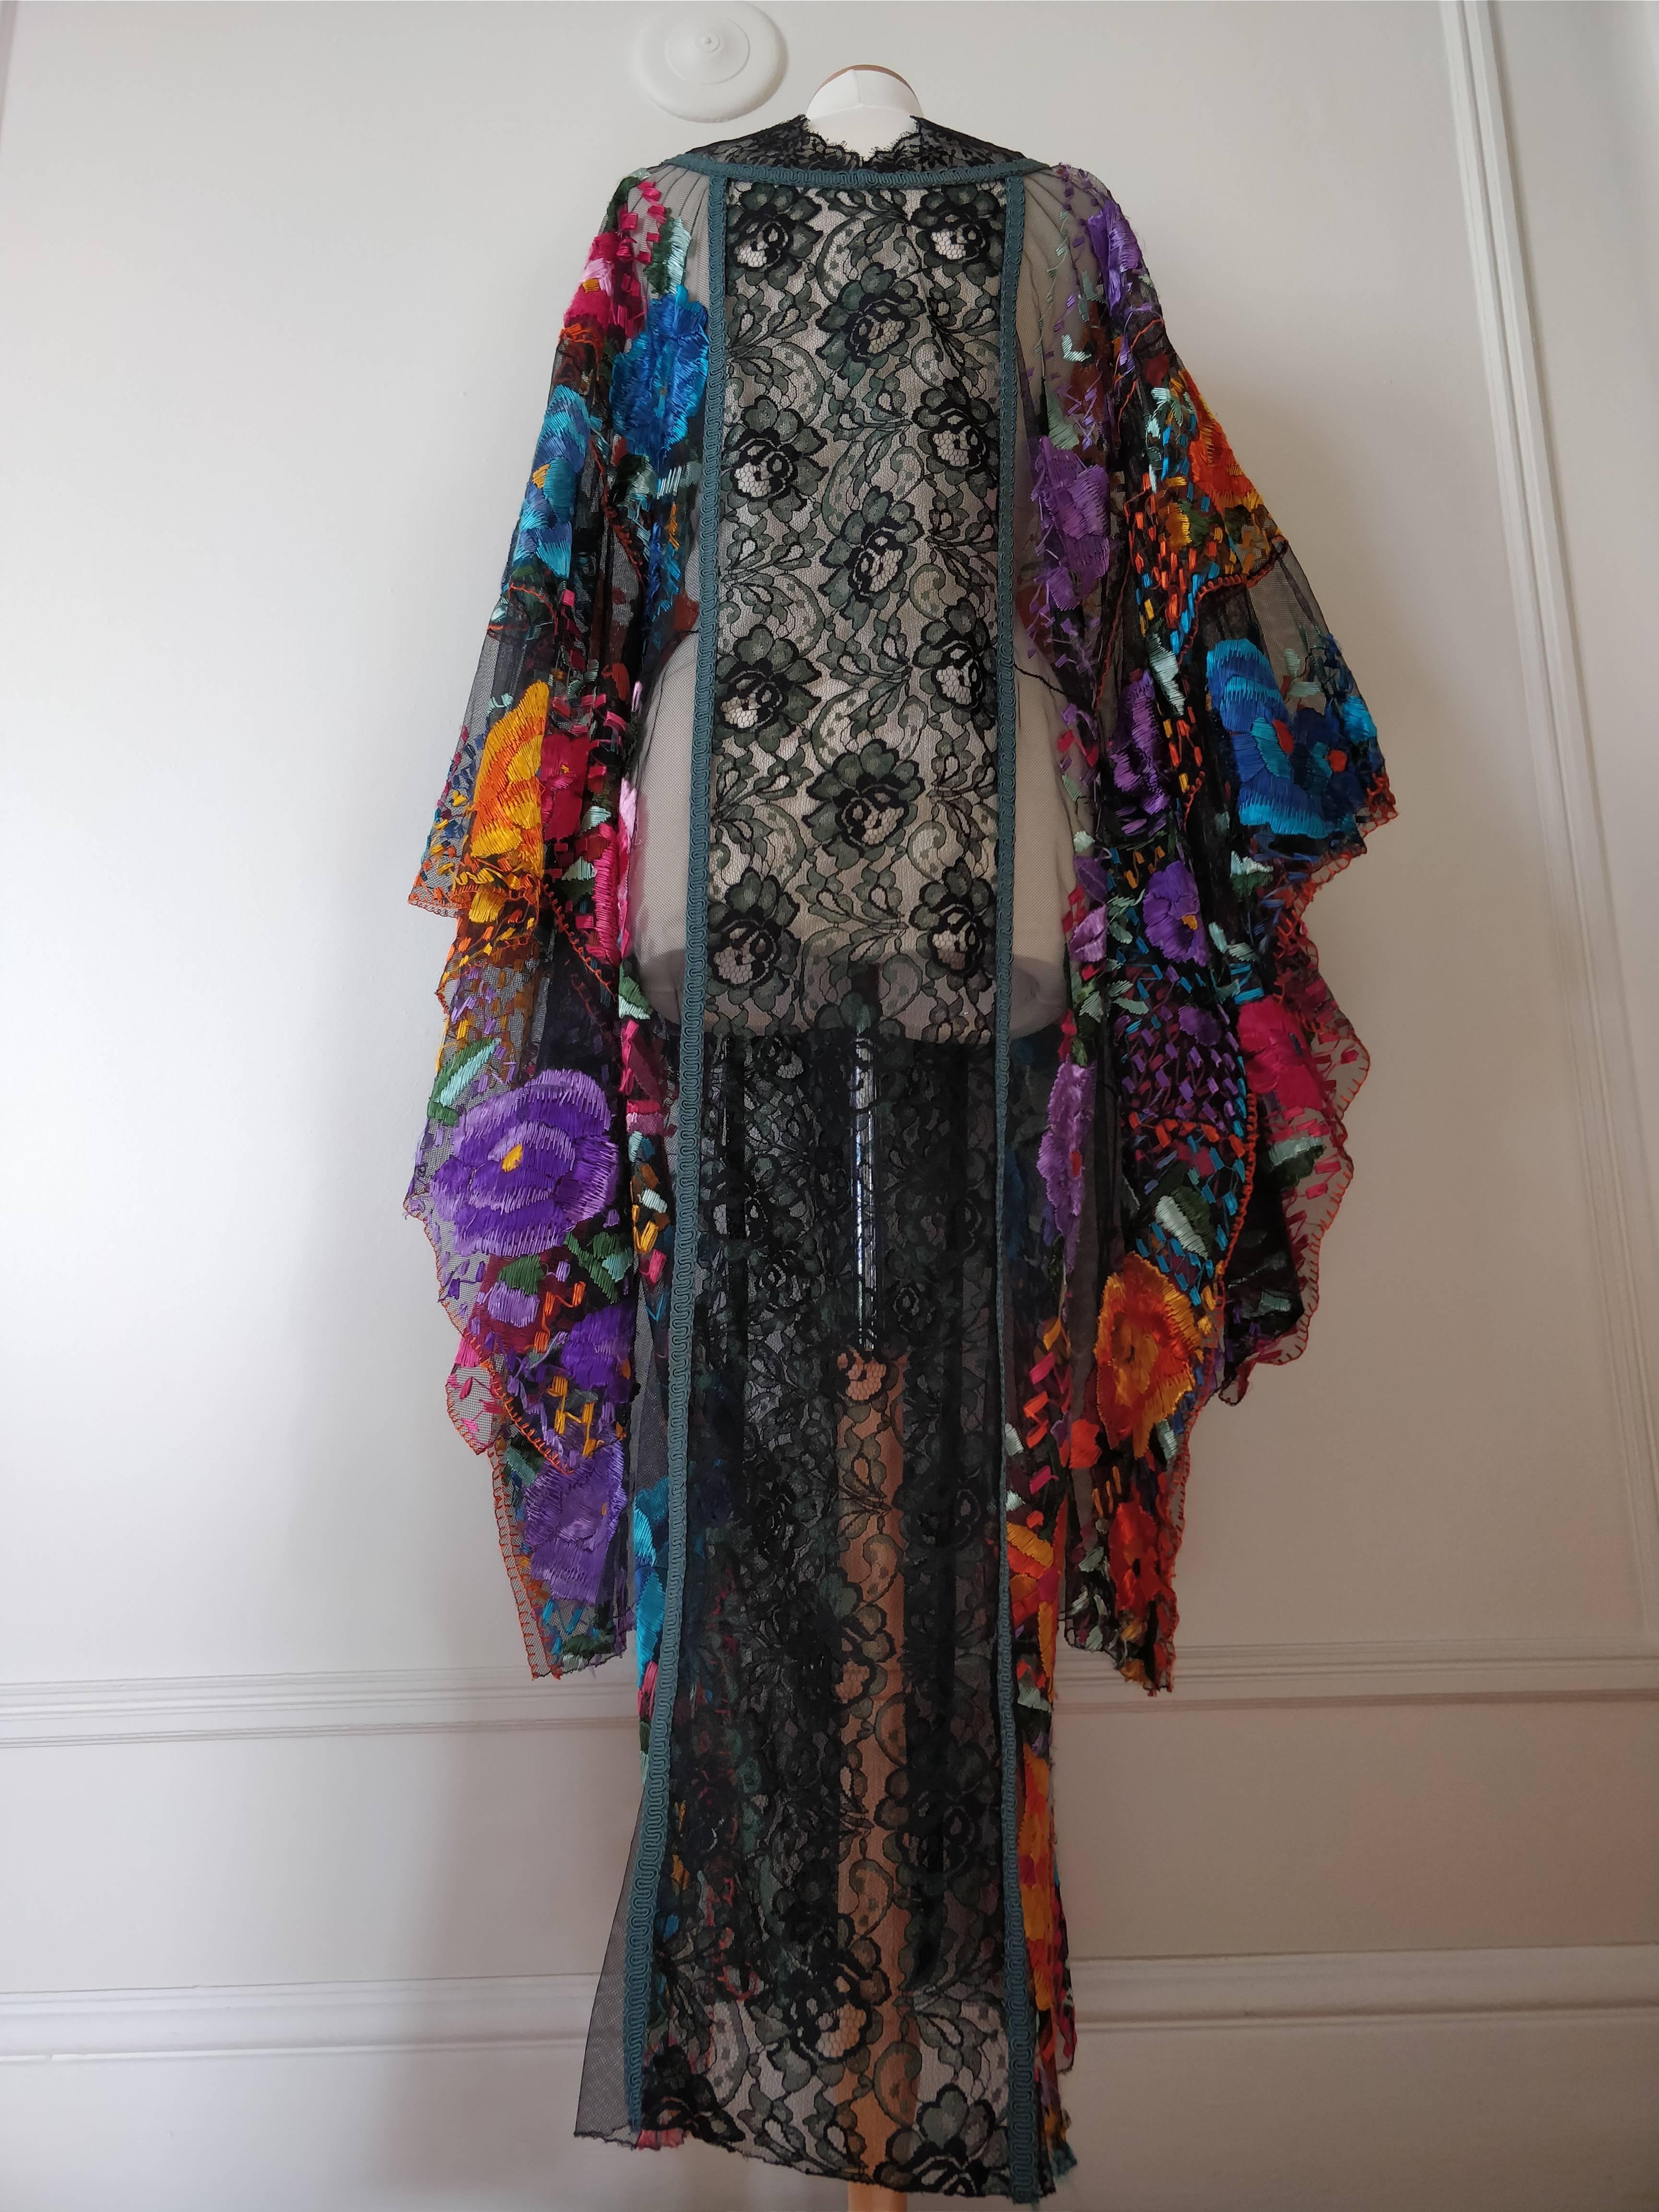 1950s Net and mixed lace caftan with traditional Mexican embroidery panels. 
Custom made in the style of Thea Porter. Fits up to a size modern 10.